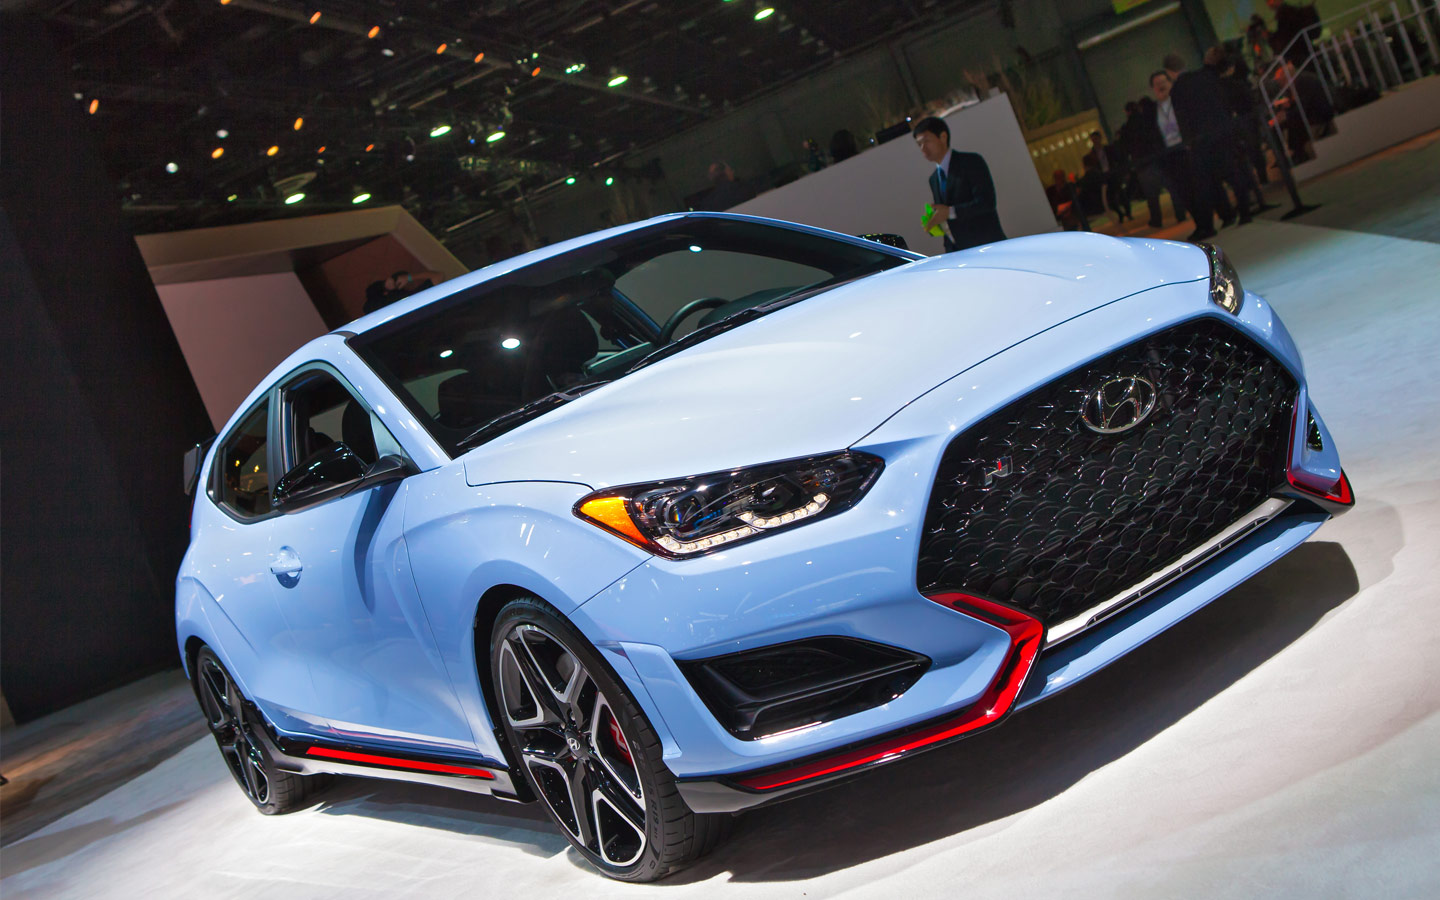 As for Hyundai Veloster models by year - the N trim level made its debut in 2019 